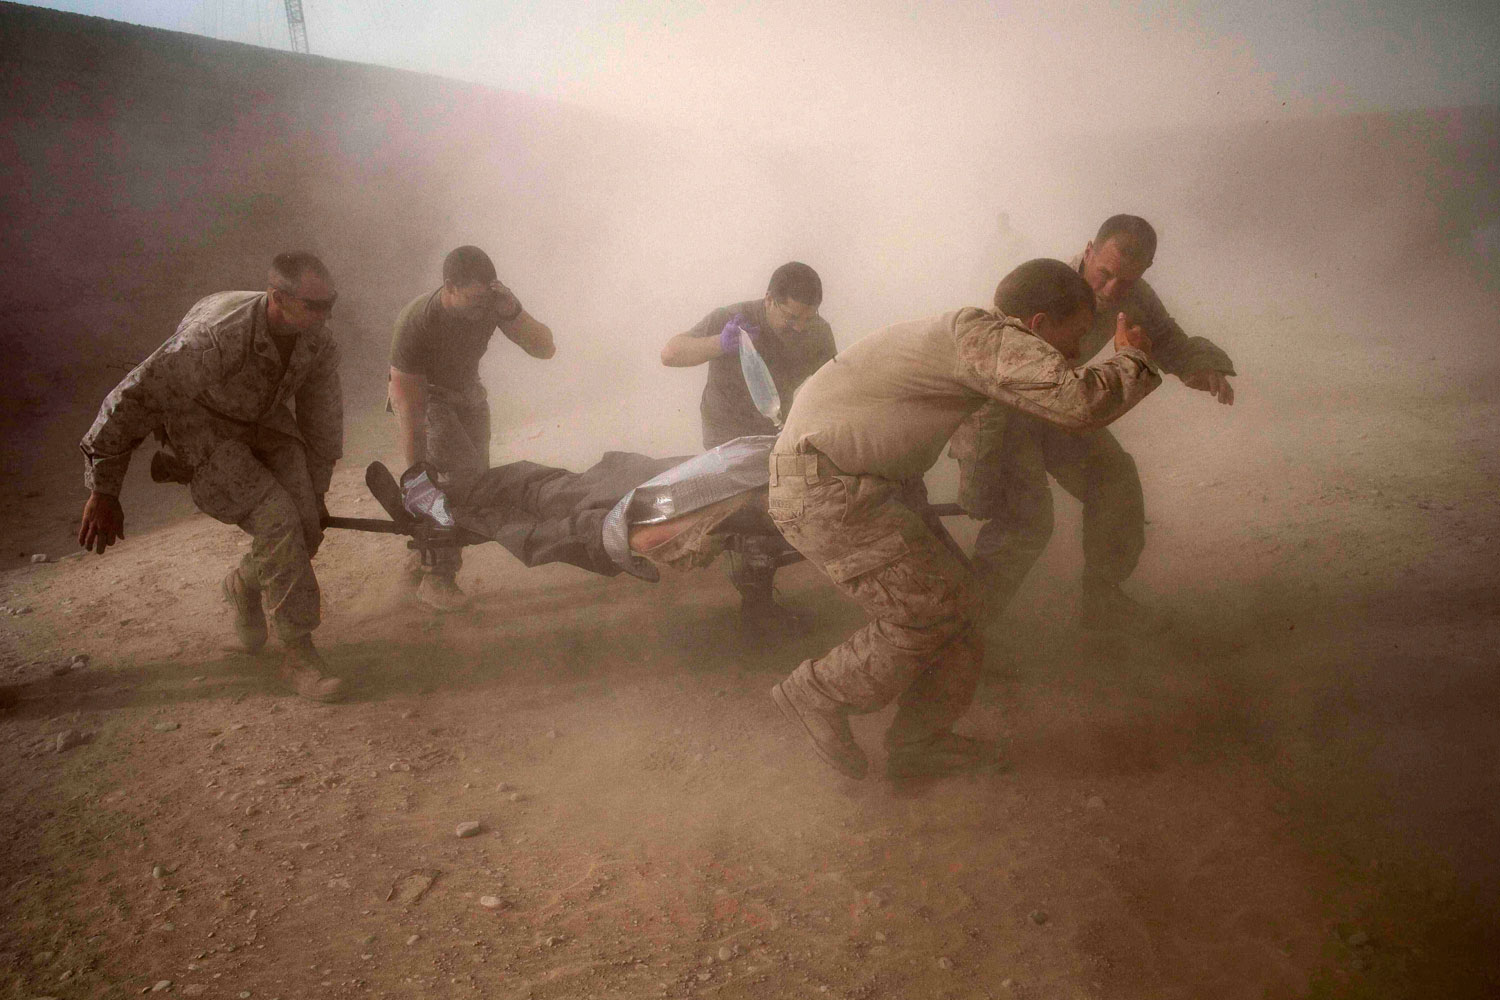 May 10, 2011.  U.S. Marines rush a wounded compatriot through a dust storm kicked up by a U.S. helicopter near Sangin, Afghanistan.